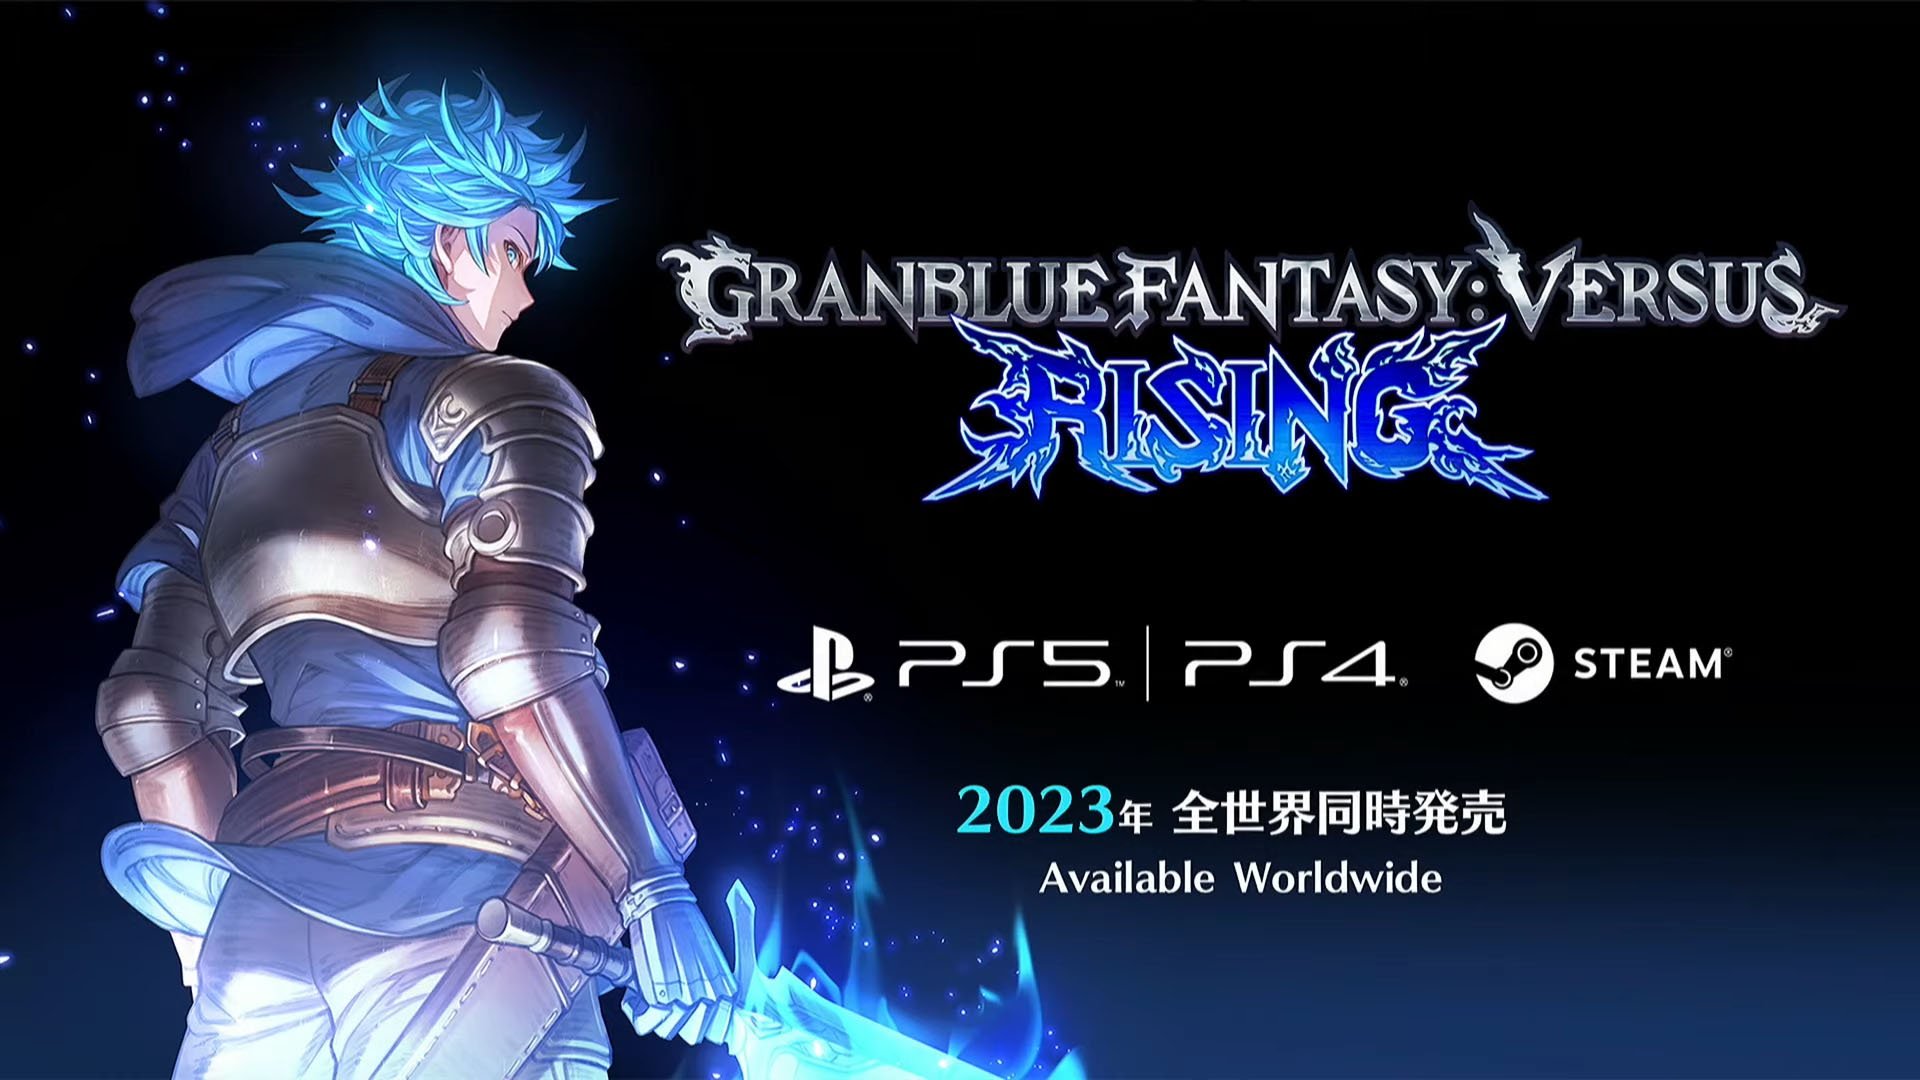 Niche Gamer - Granblue Fantasy Versus: Rising is getting an online beta  this month